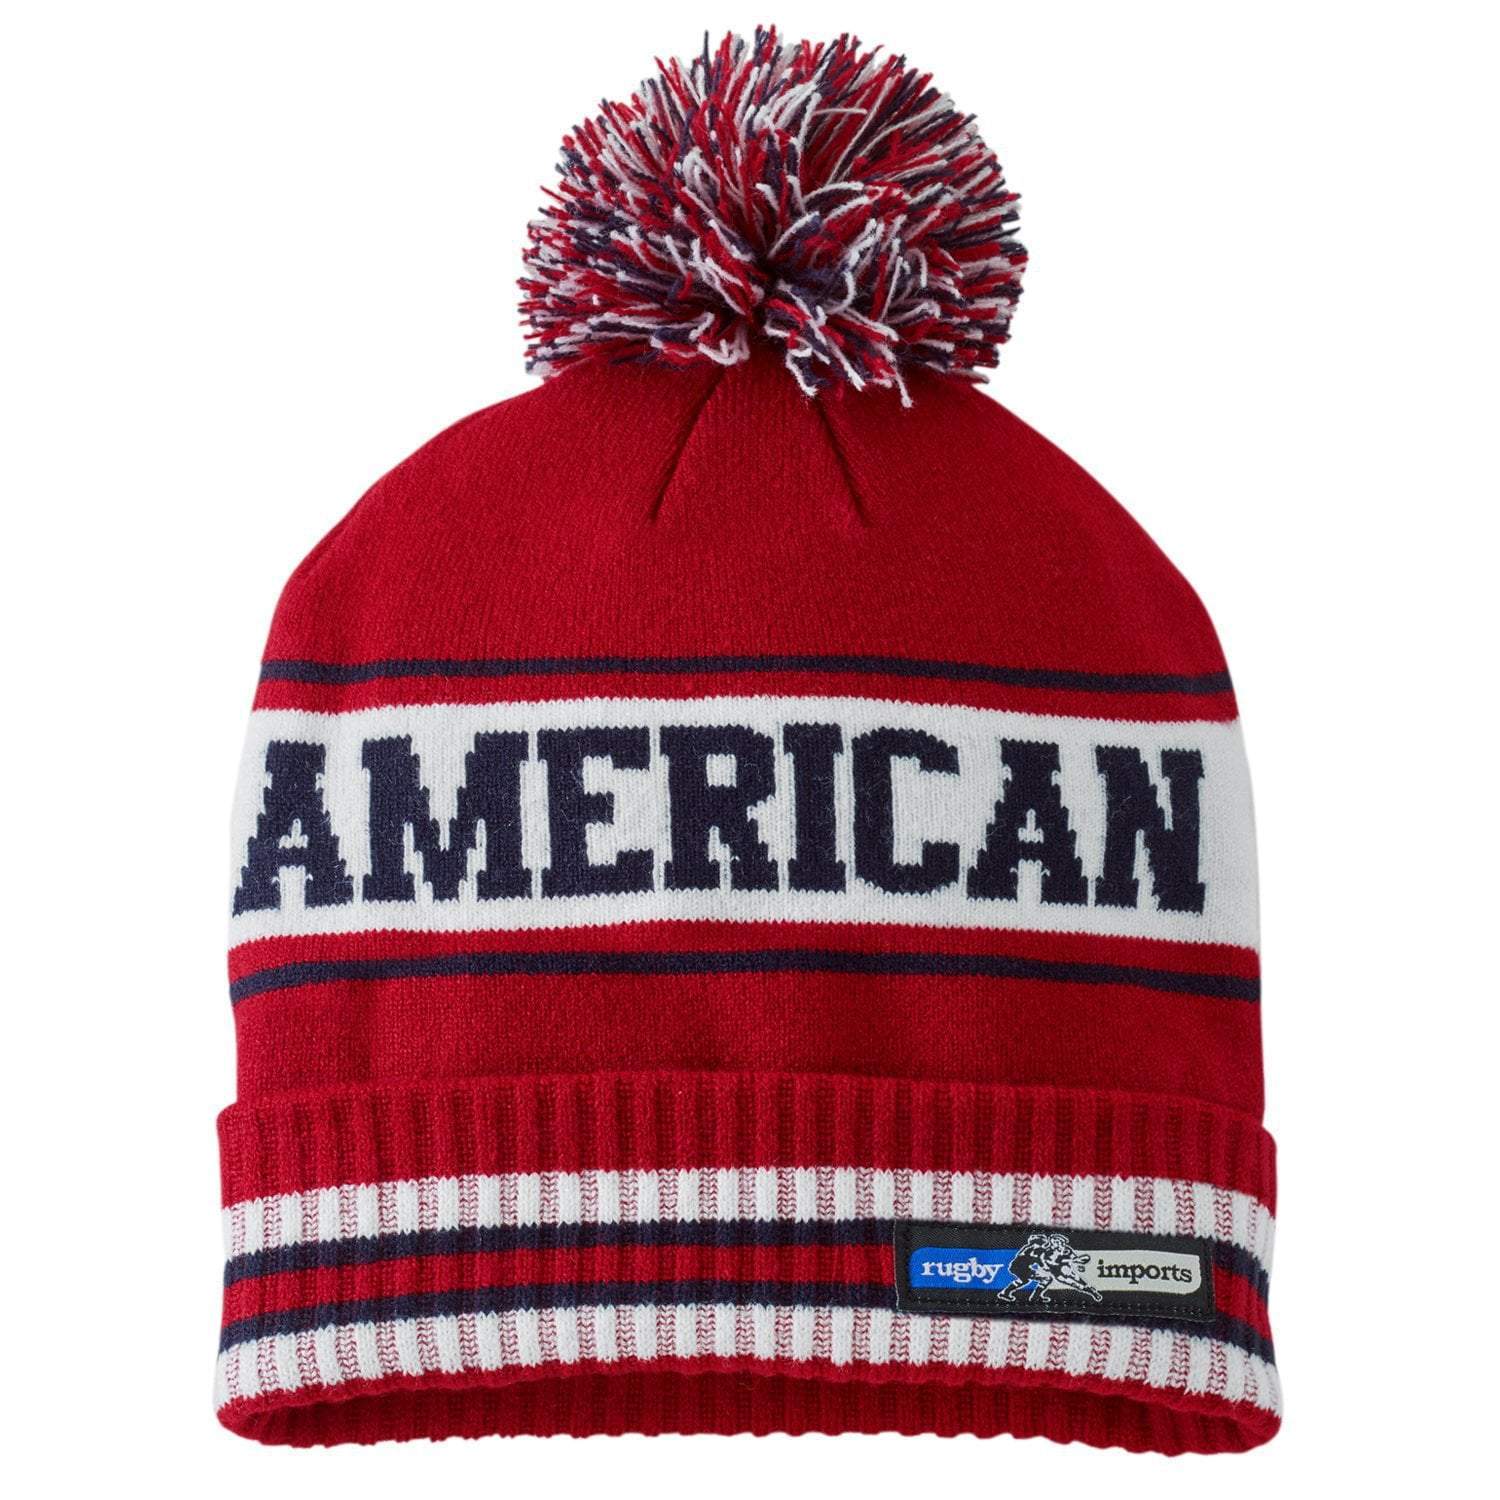 Rugby Imports American Rugby Pom Beanie